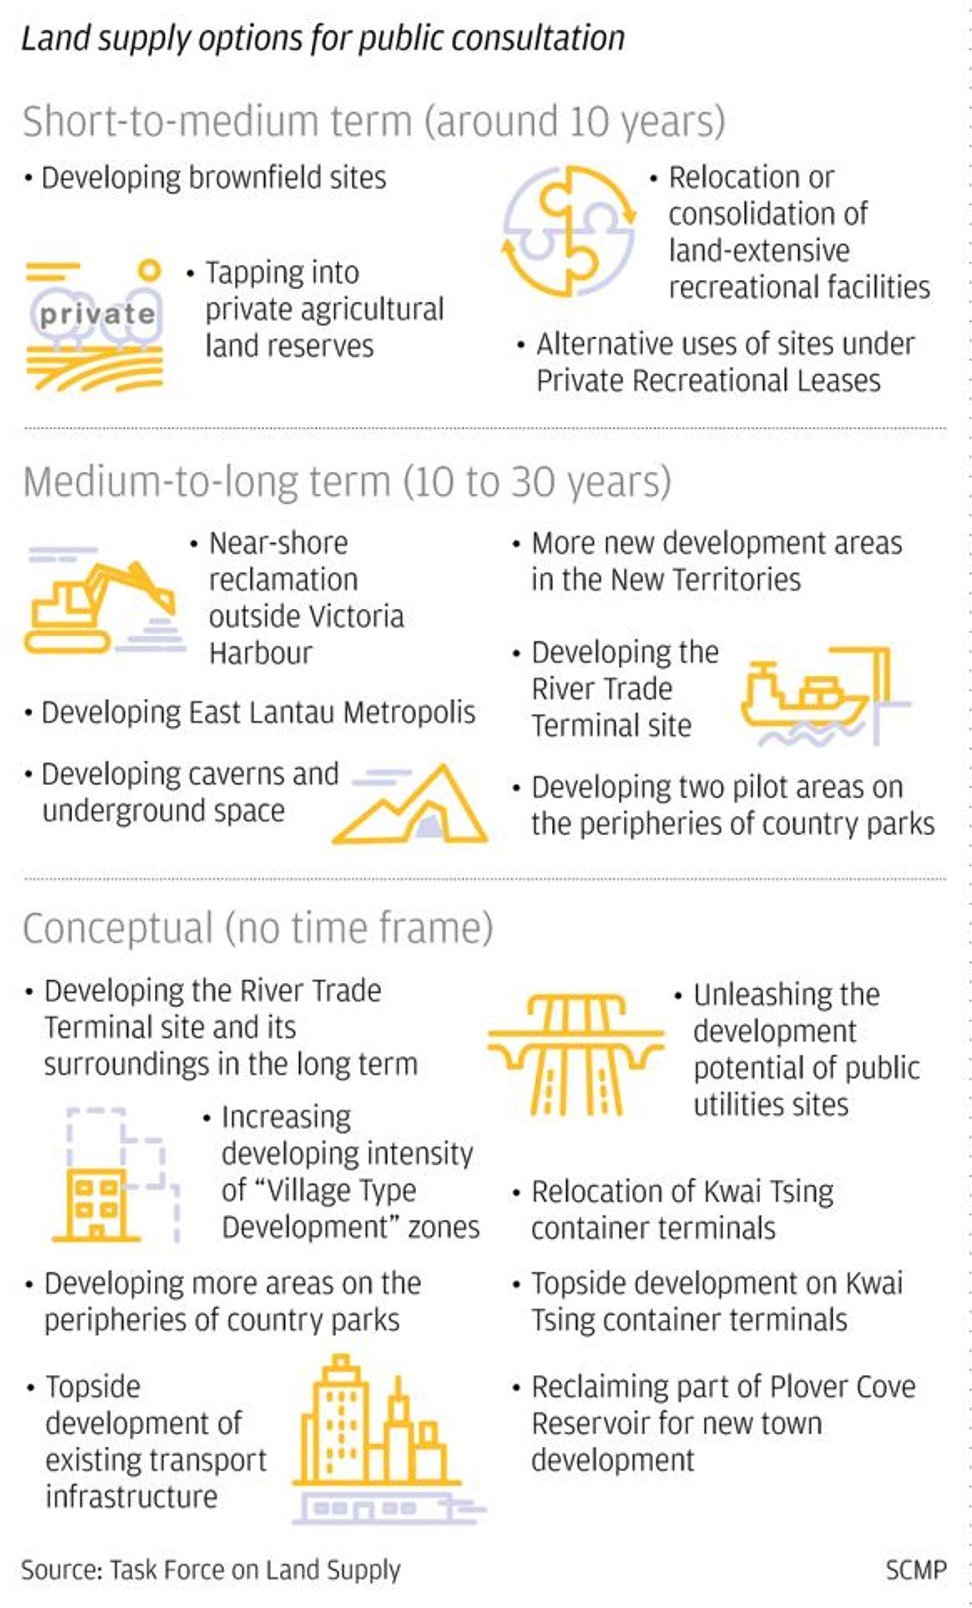 Land supply options for public consultation